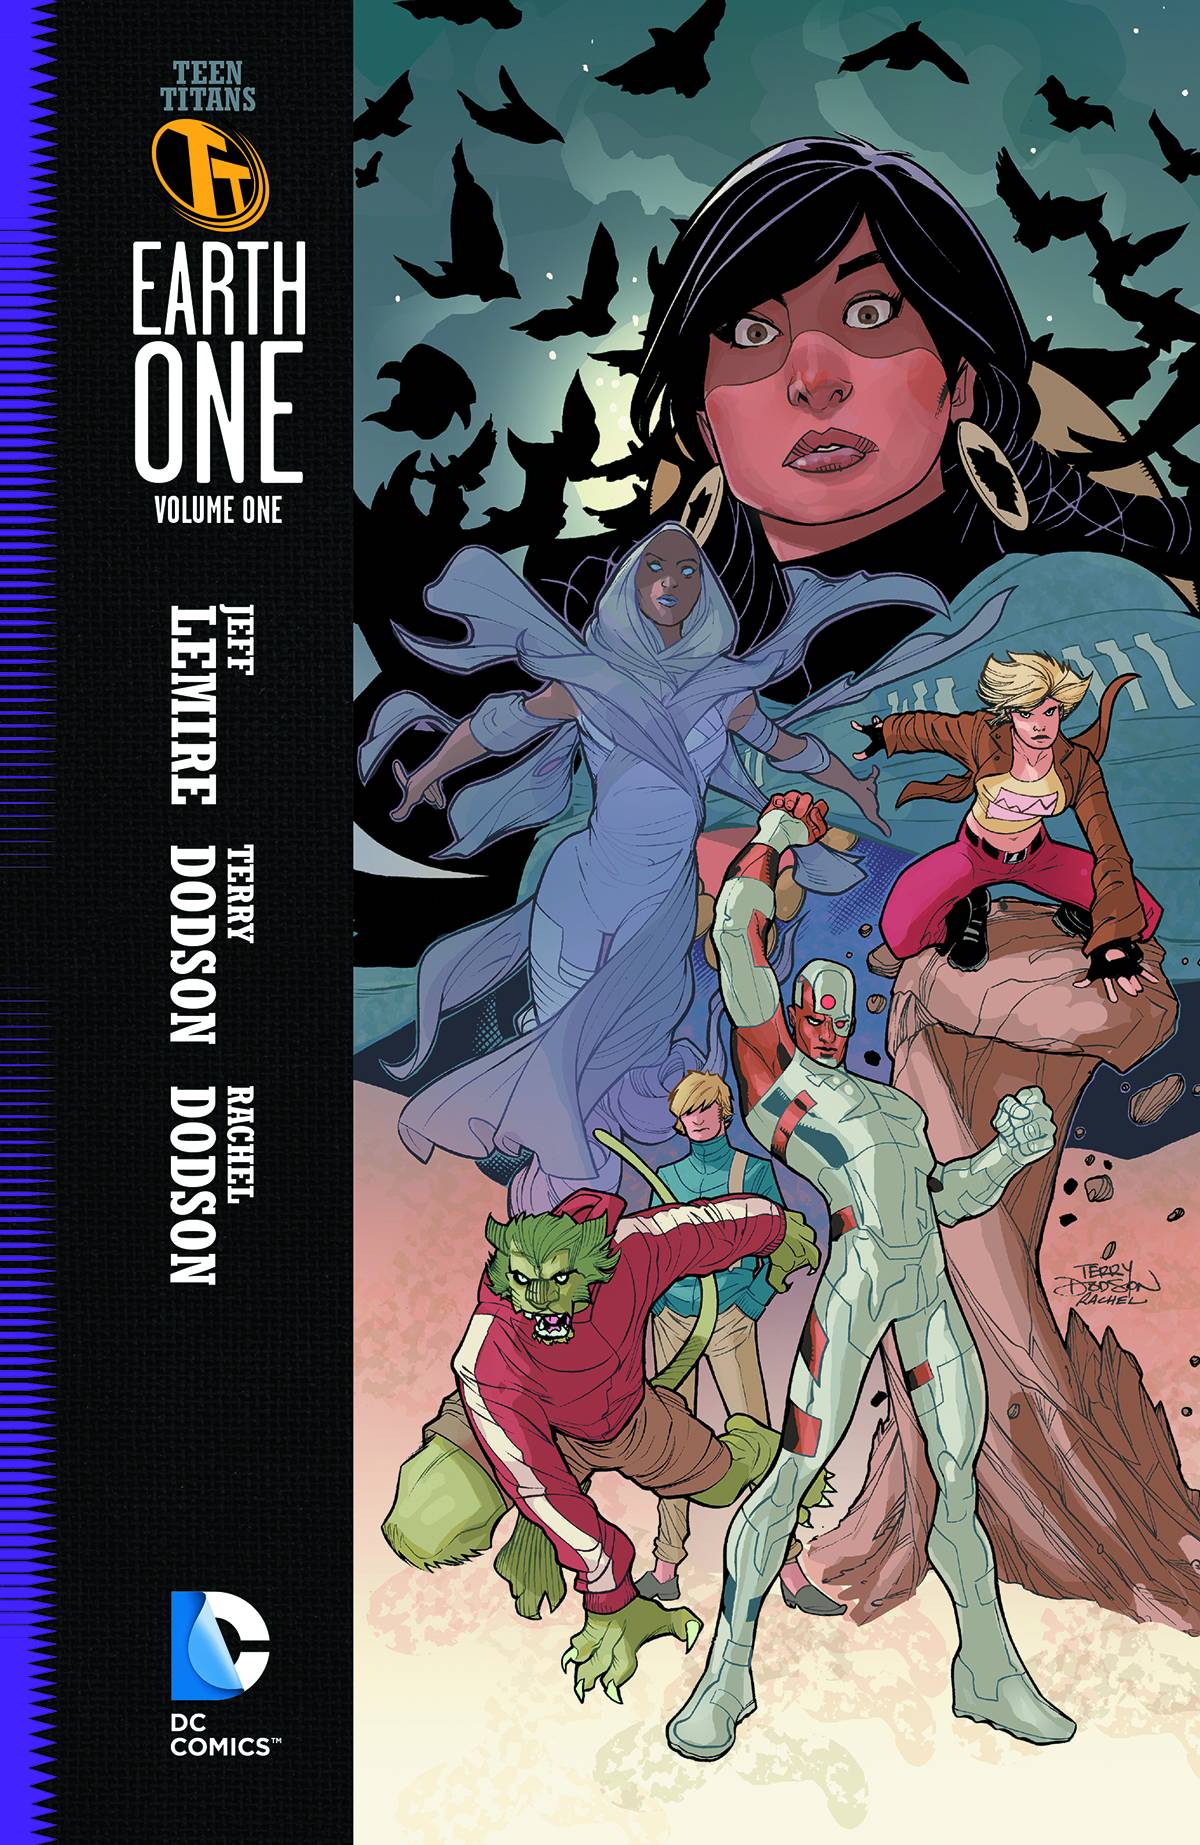 Teen Titans Earth One Hardcover Volume 1